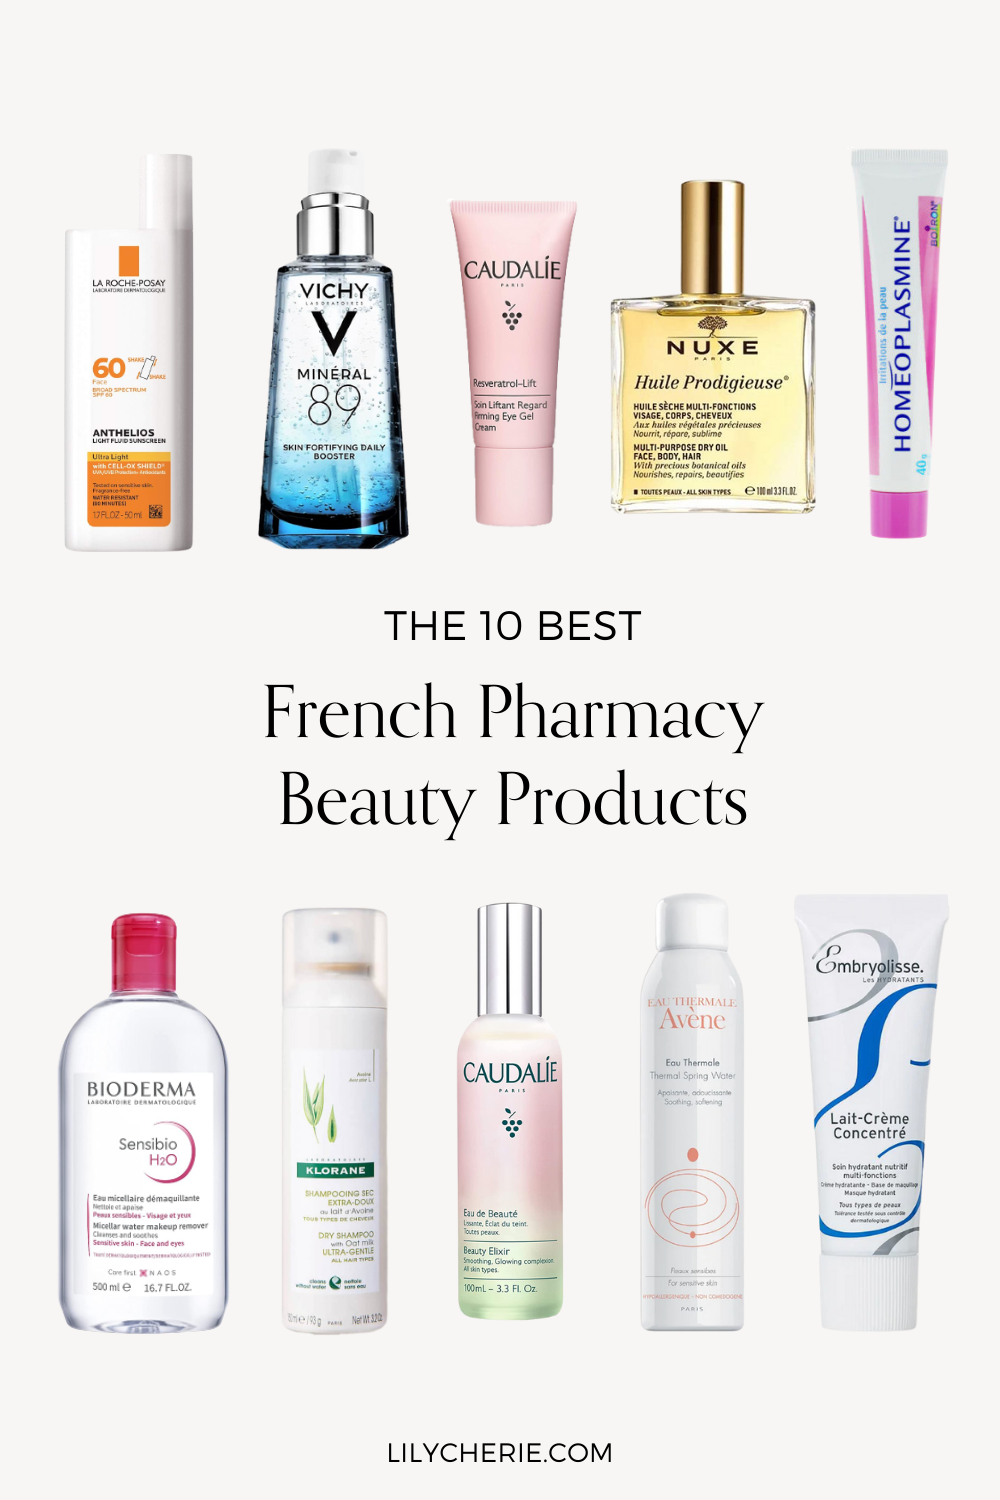 The 10 Best French Pharmacy Beauty Products